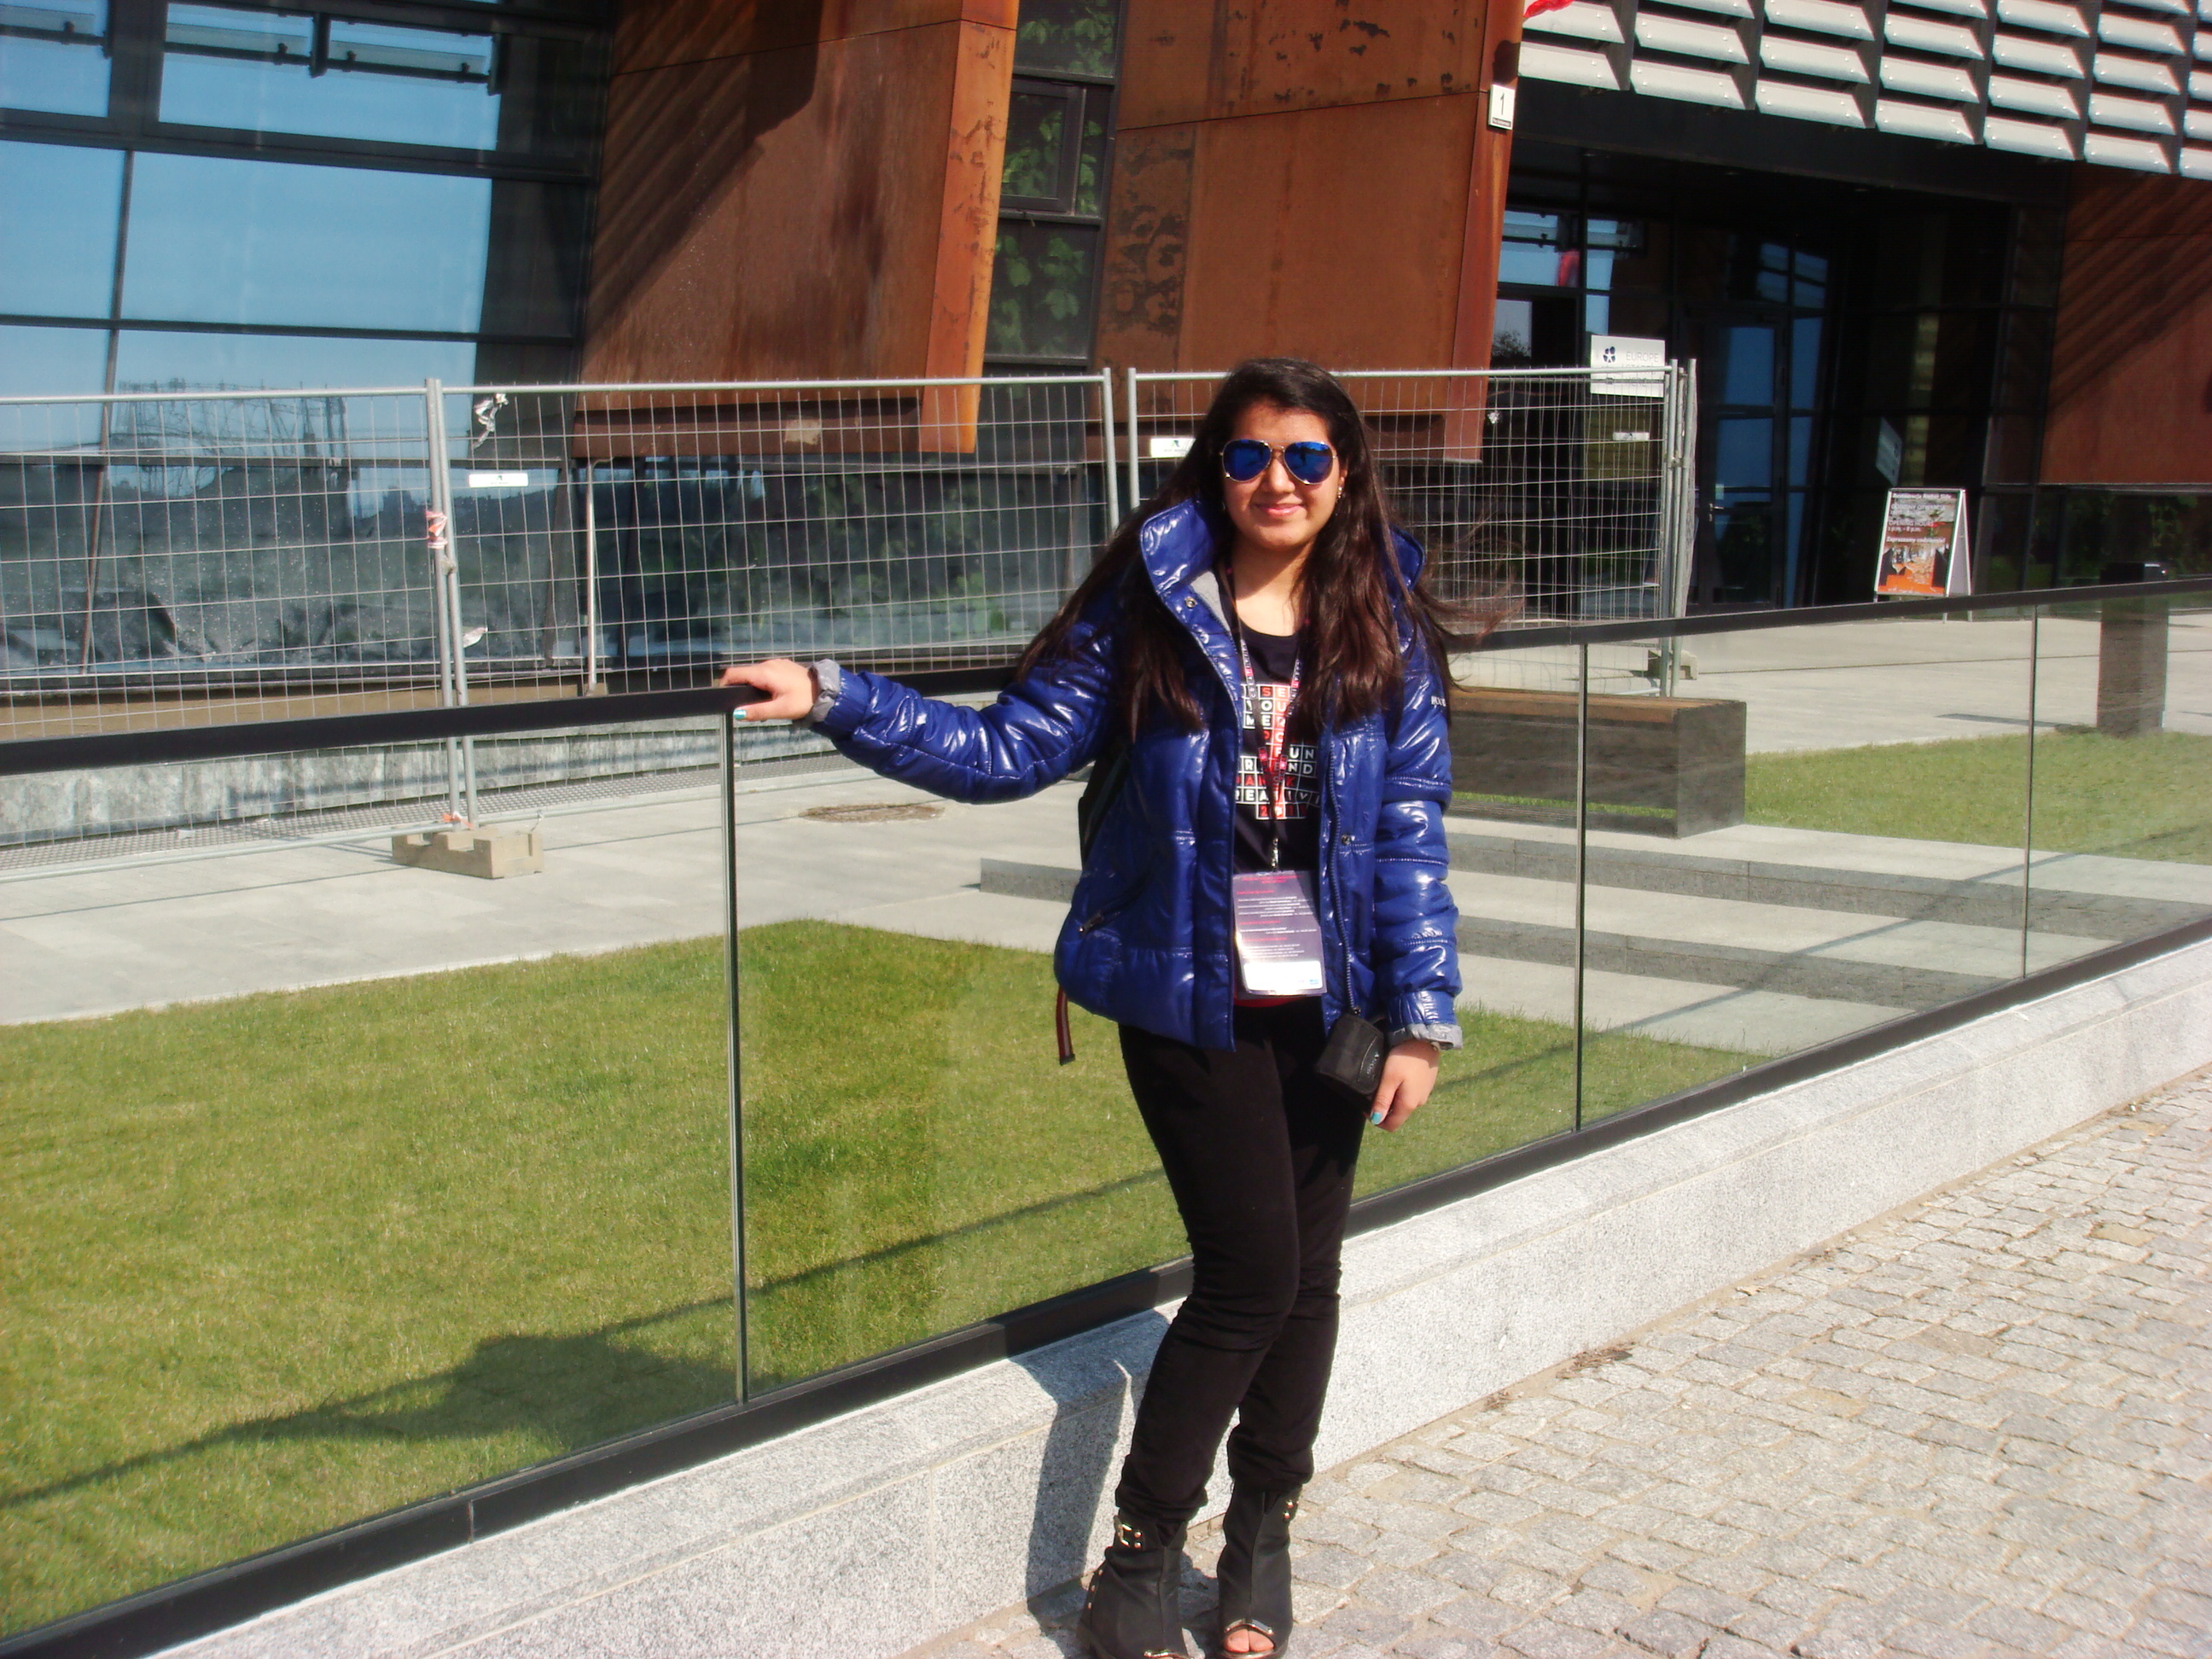 Ananya Grover outside the Odyssey competition in Poland.